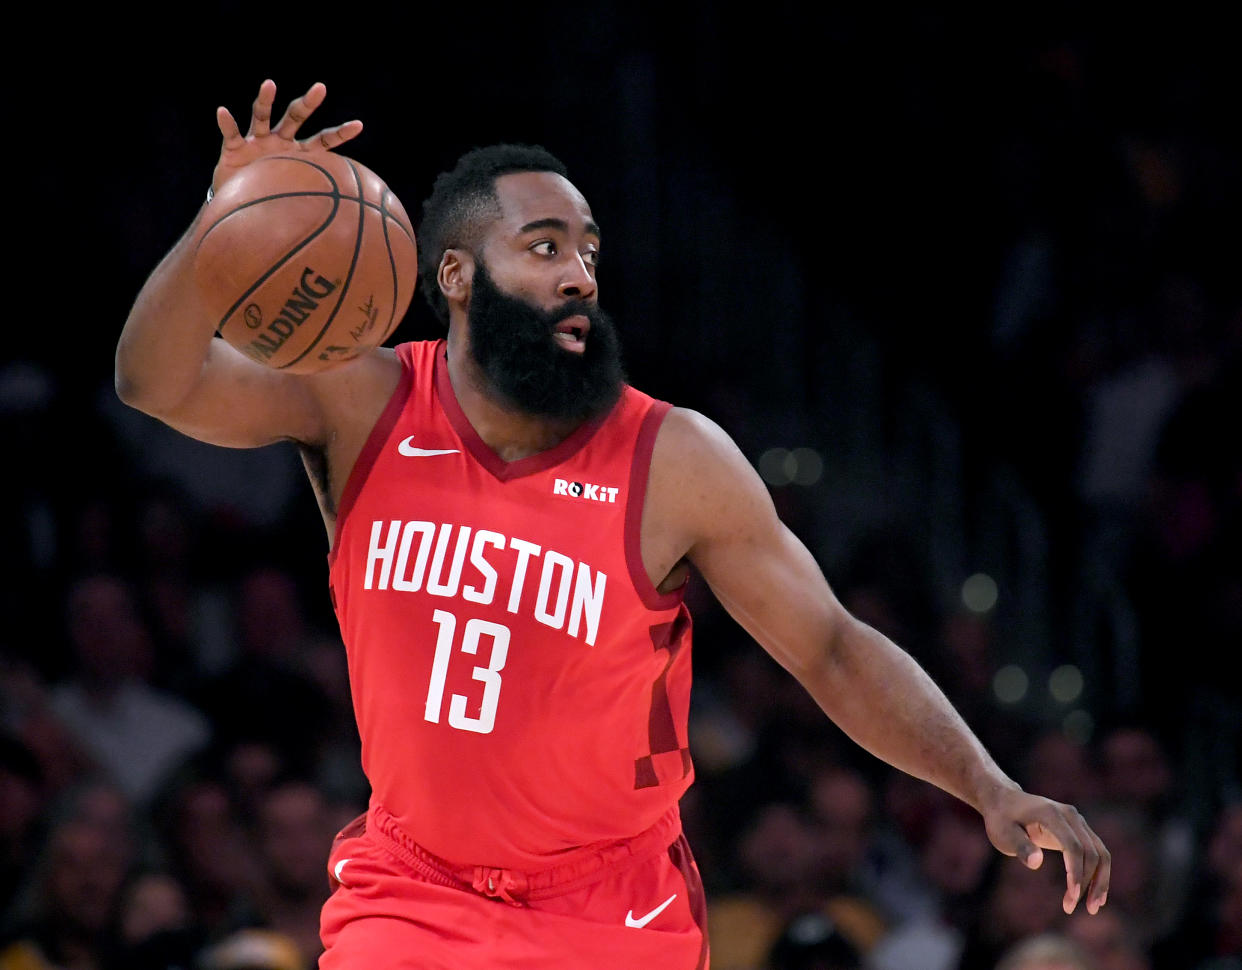 James Harden tries to control the ball during a 111-106 loss to the Los Angeles Lakers on Thursday night. (Photo by Harry How/Getty Images)